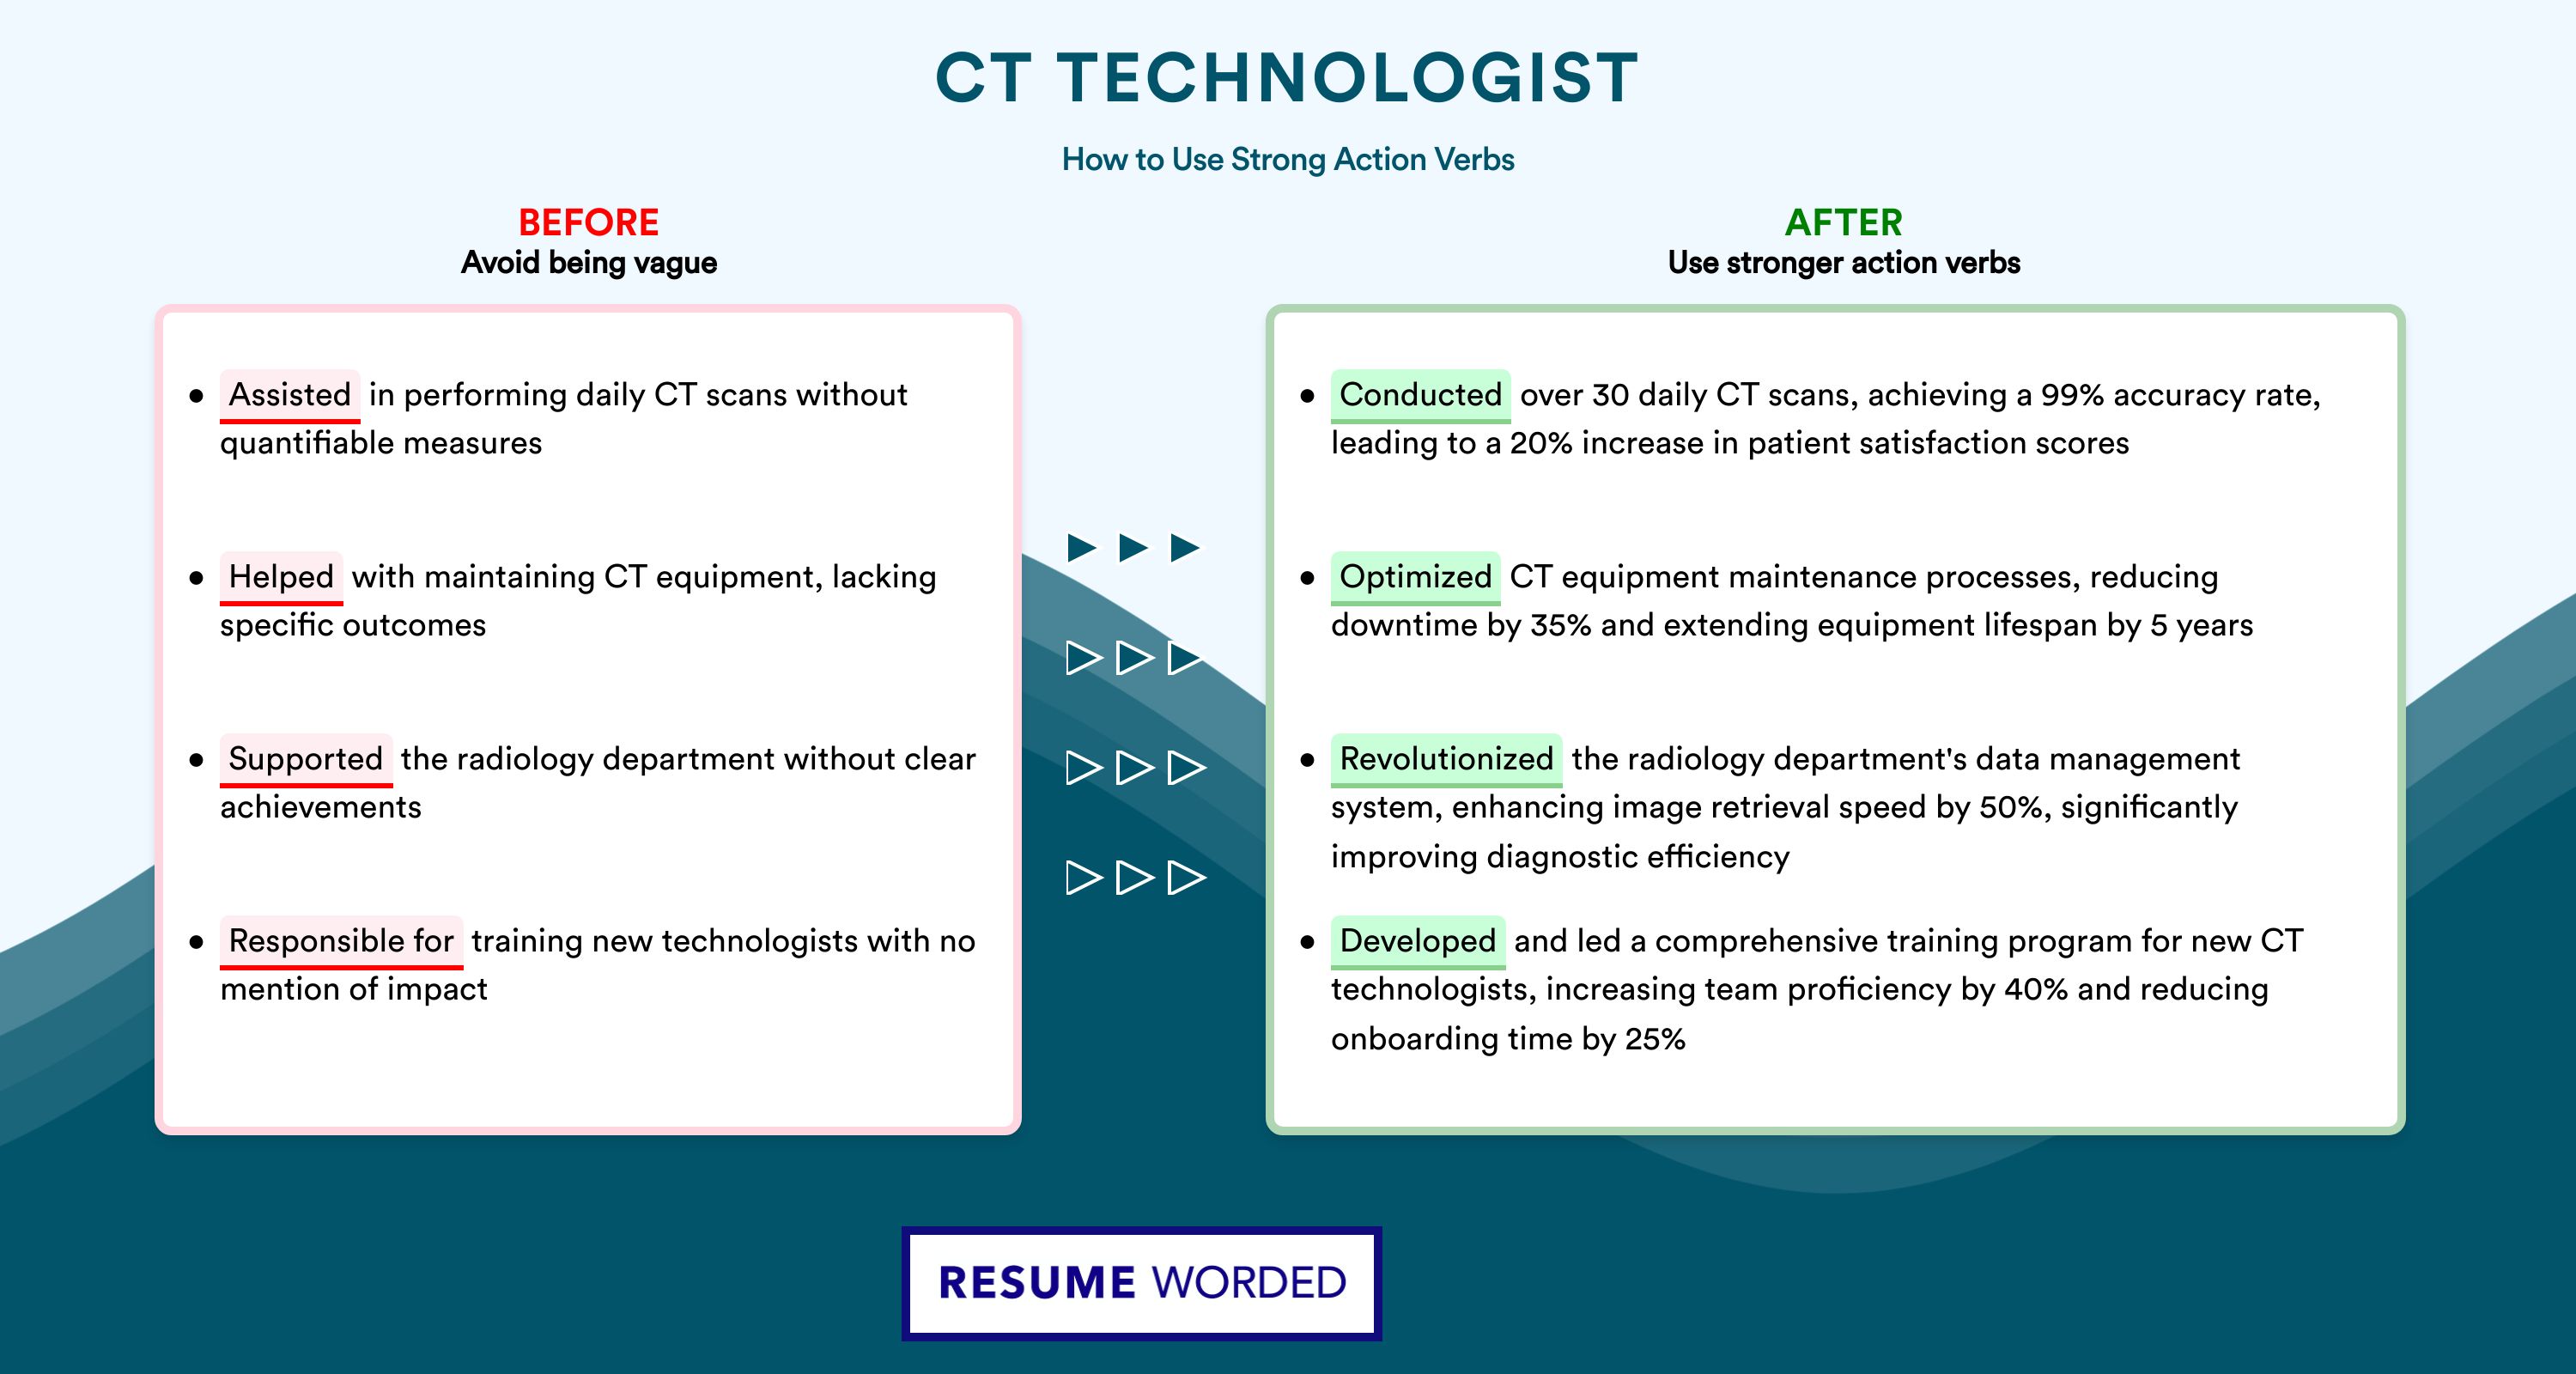 Action Verbs for CT Technologist